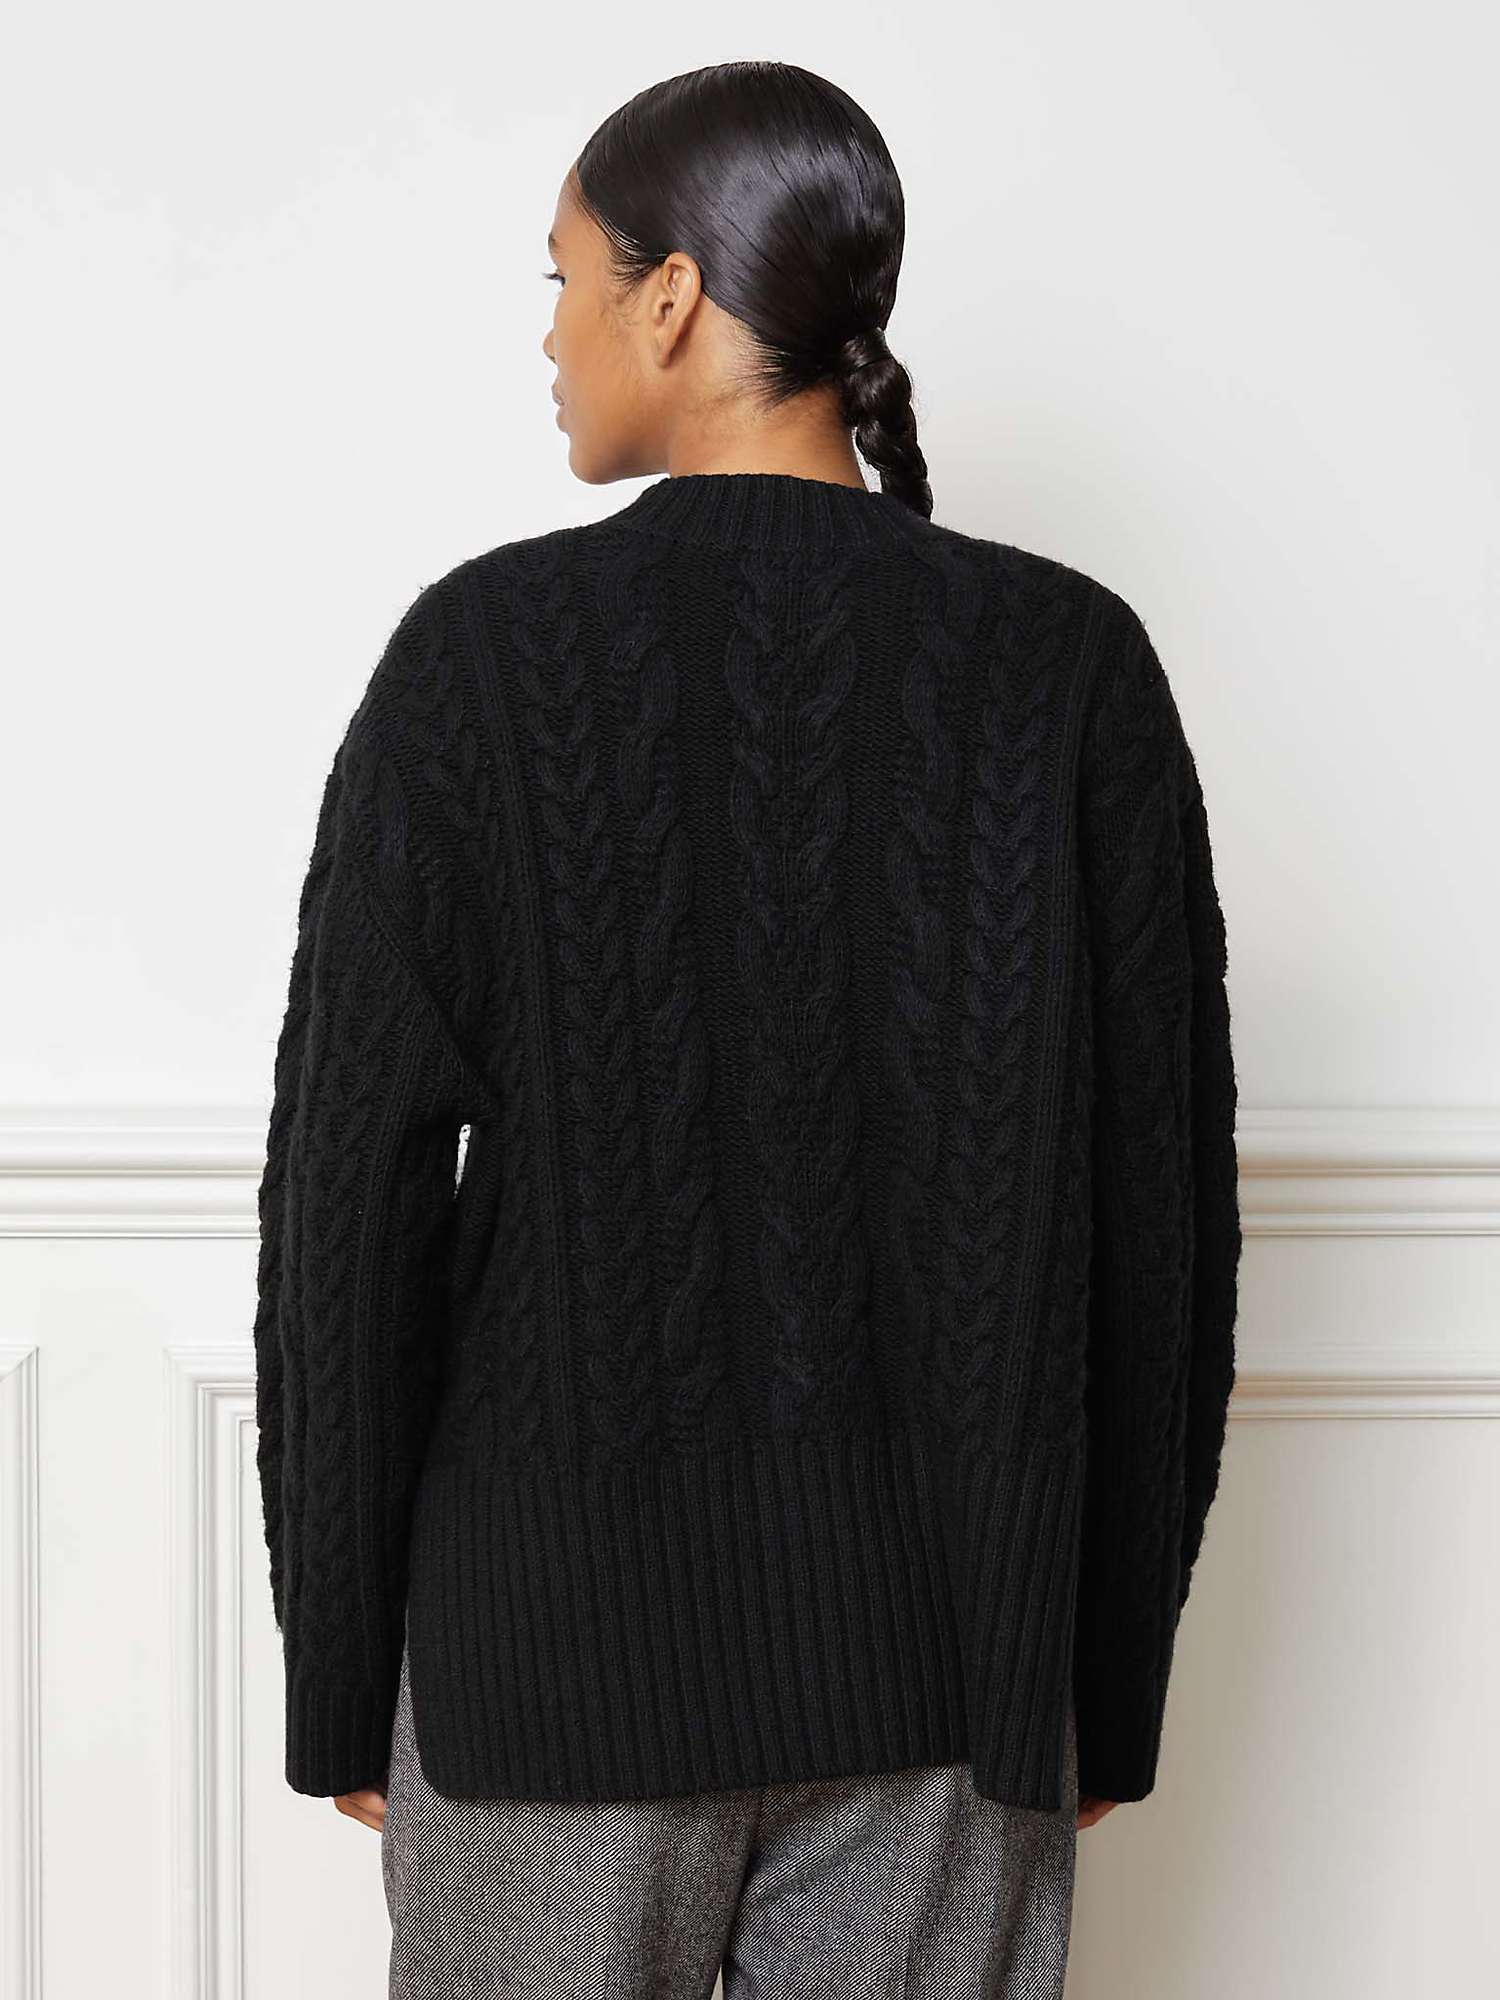 Buy Albaray Cable Wool Blend Jumper Online at johnlewis.com